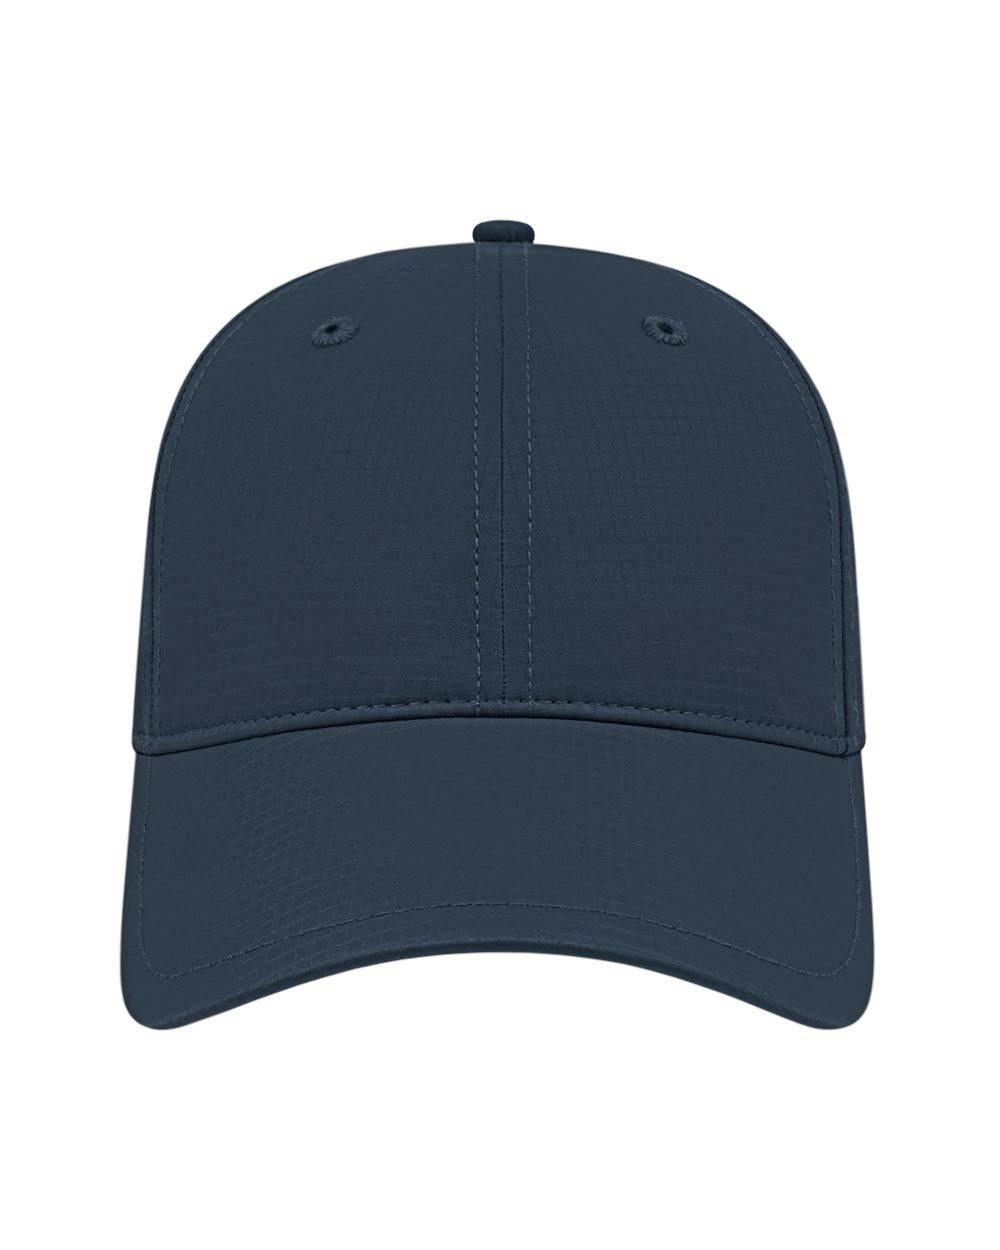 Image for Structured Active Wear Cap - i7023